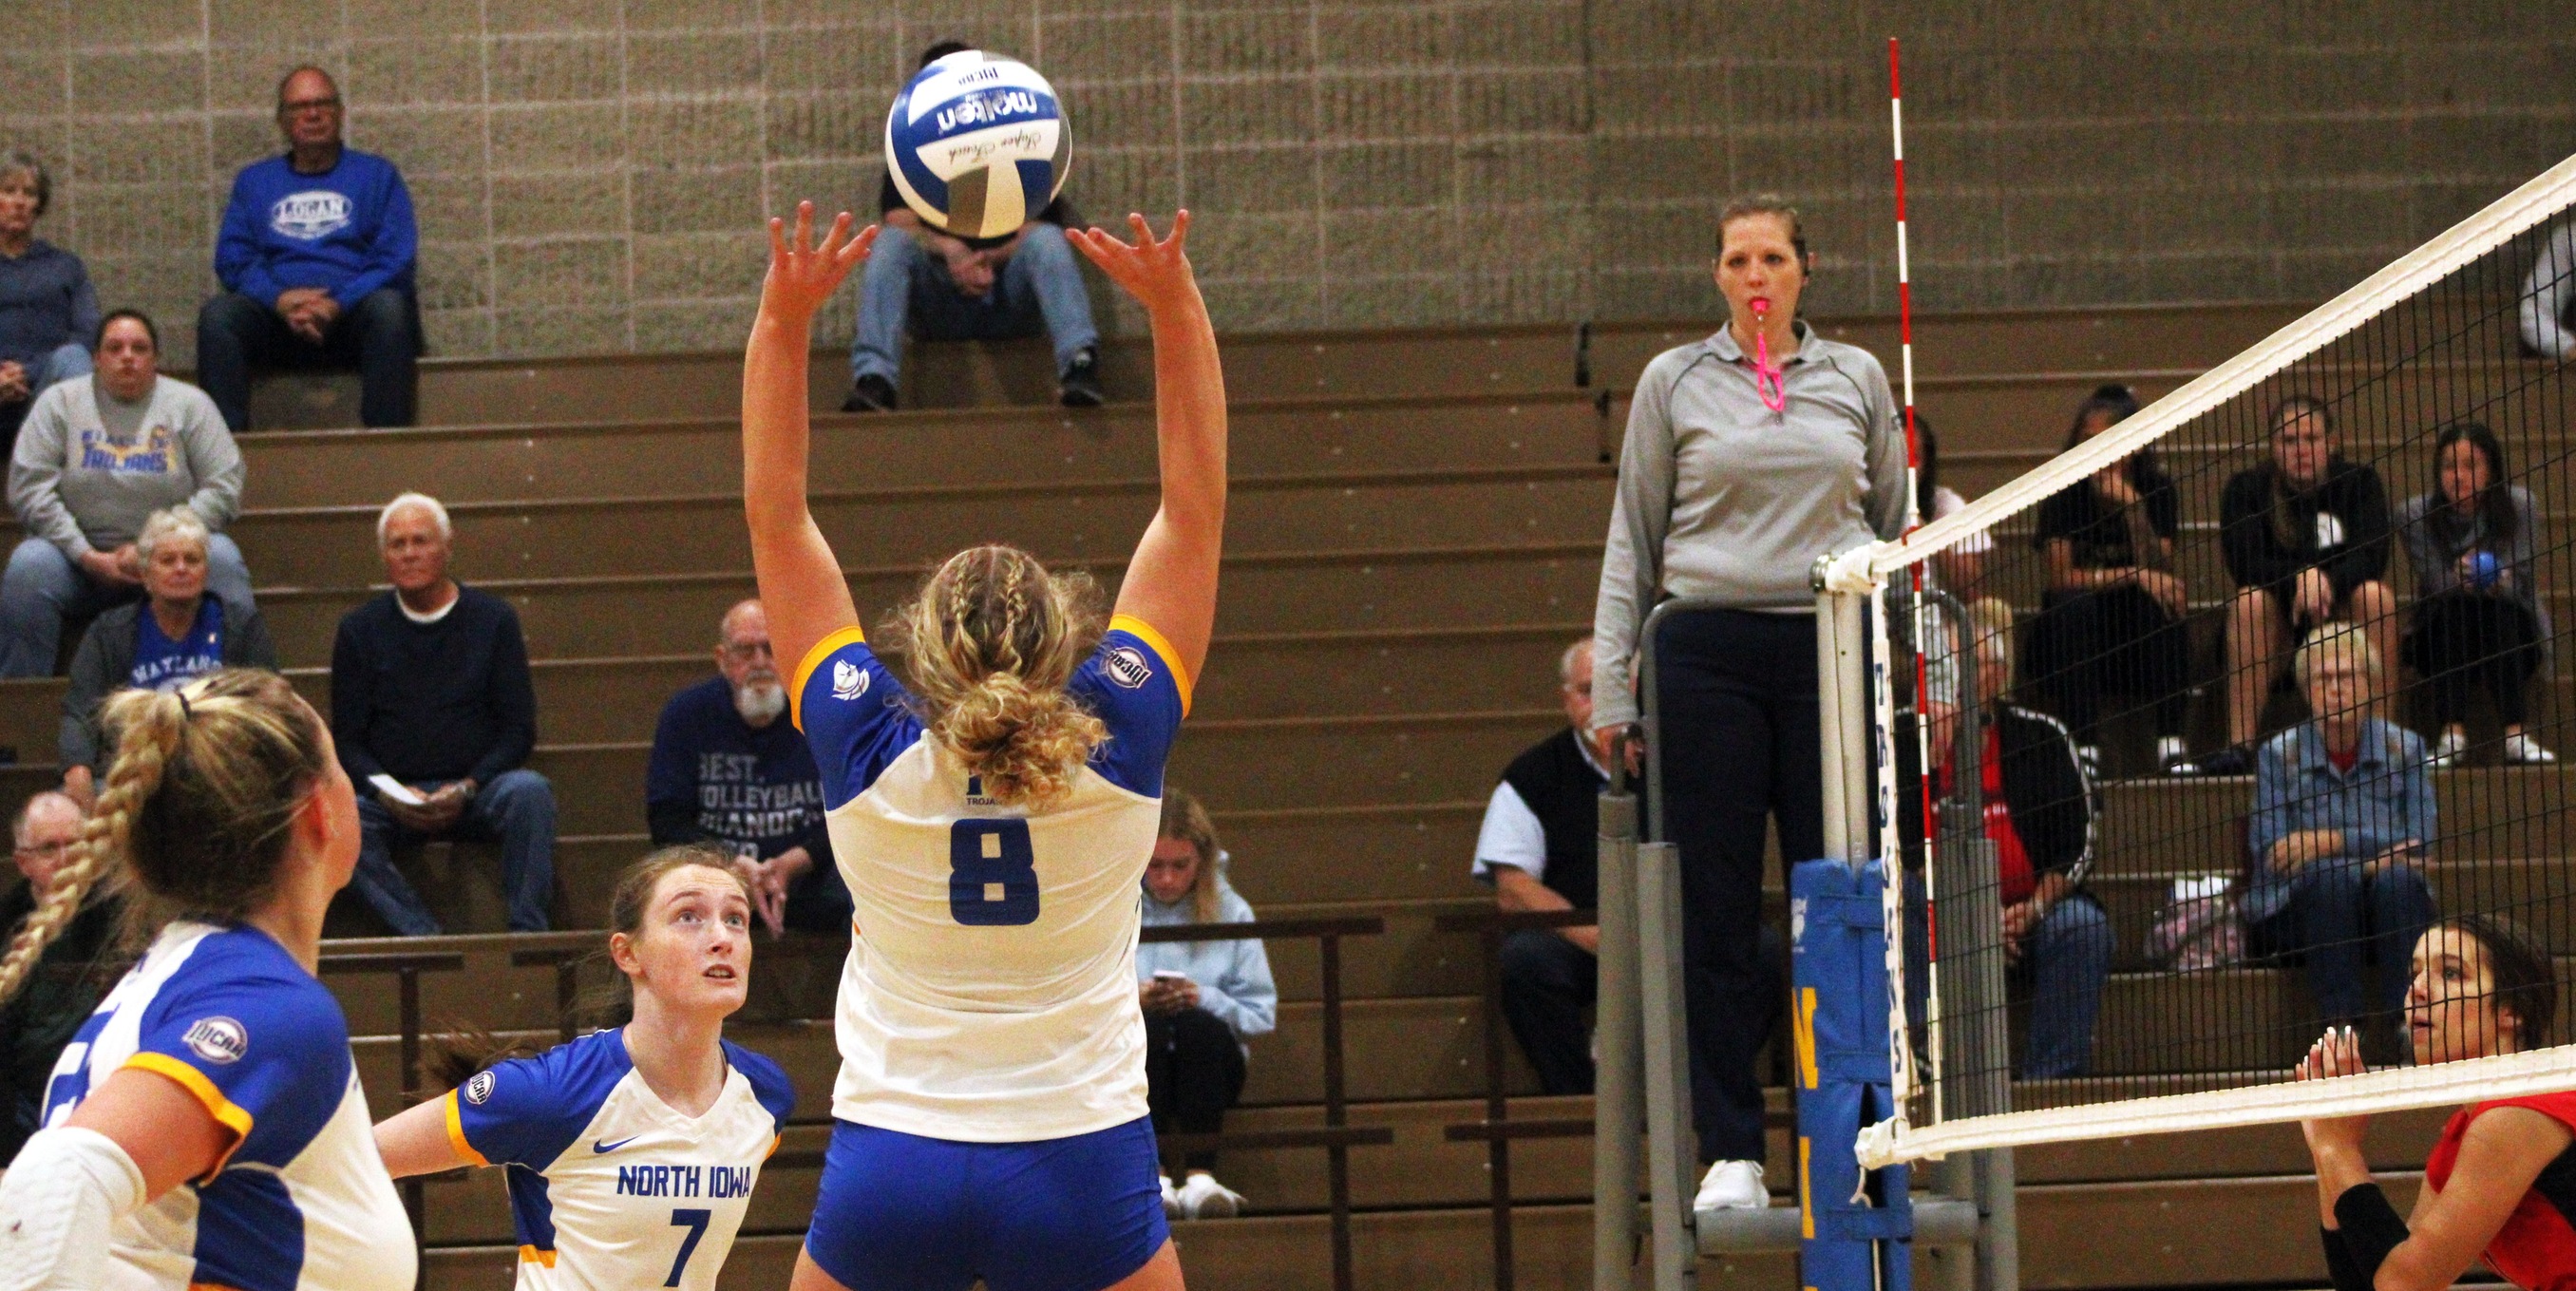 NIACC's Rylee Wetlaufer recorded her 1,000th career assist in Wednesday's home match against Northeast CC.